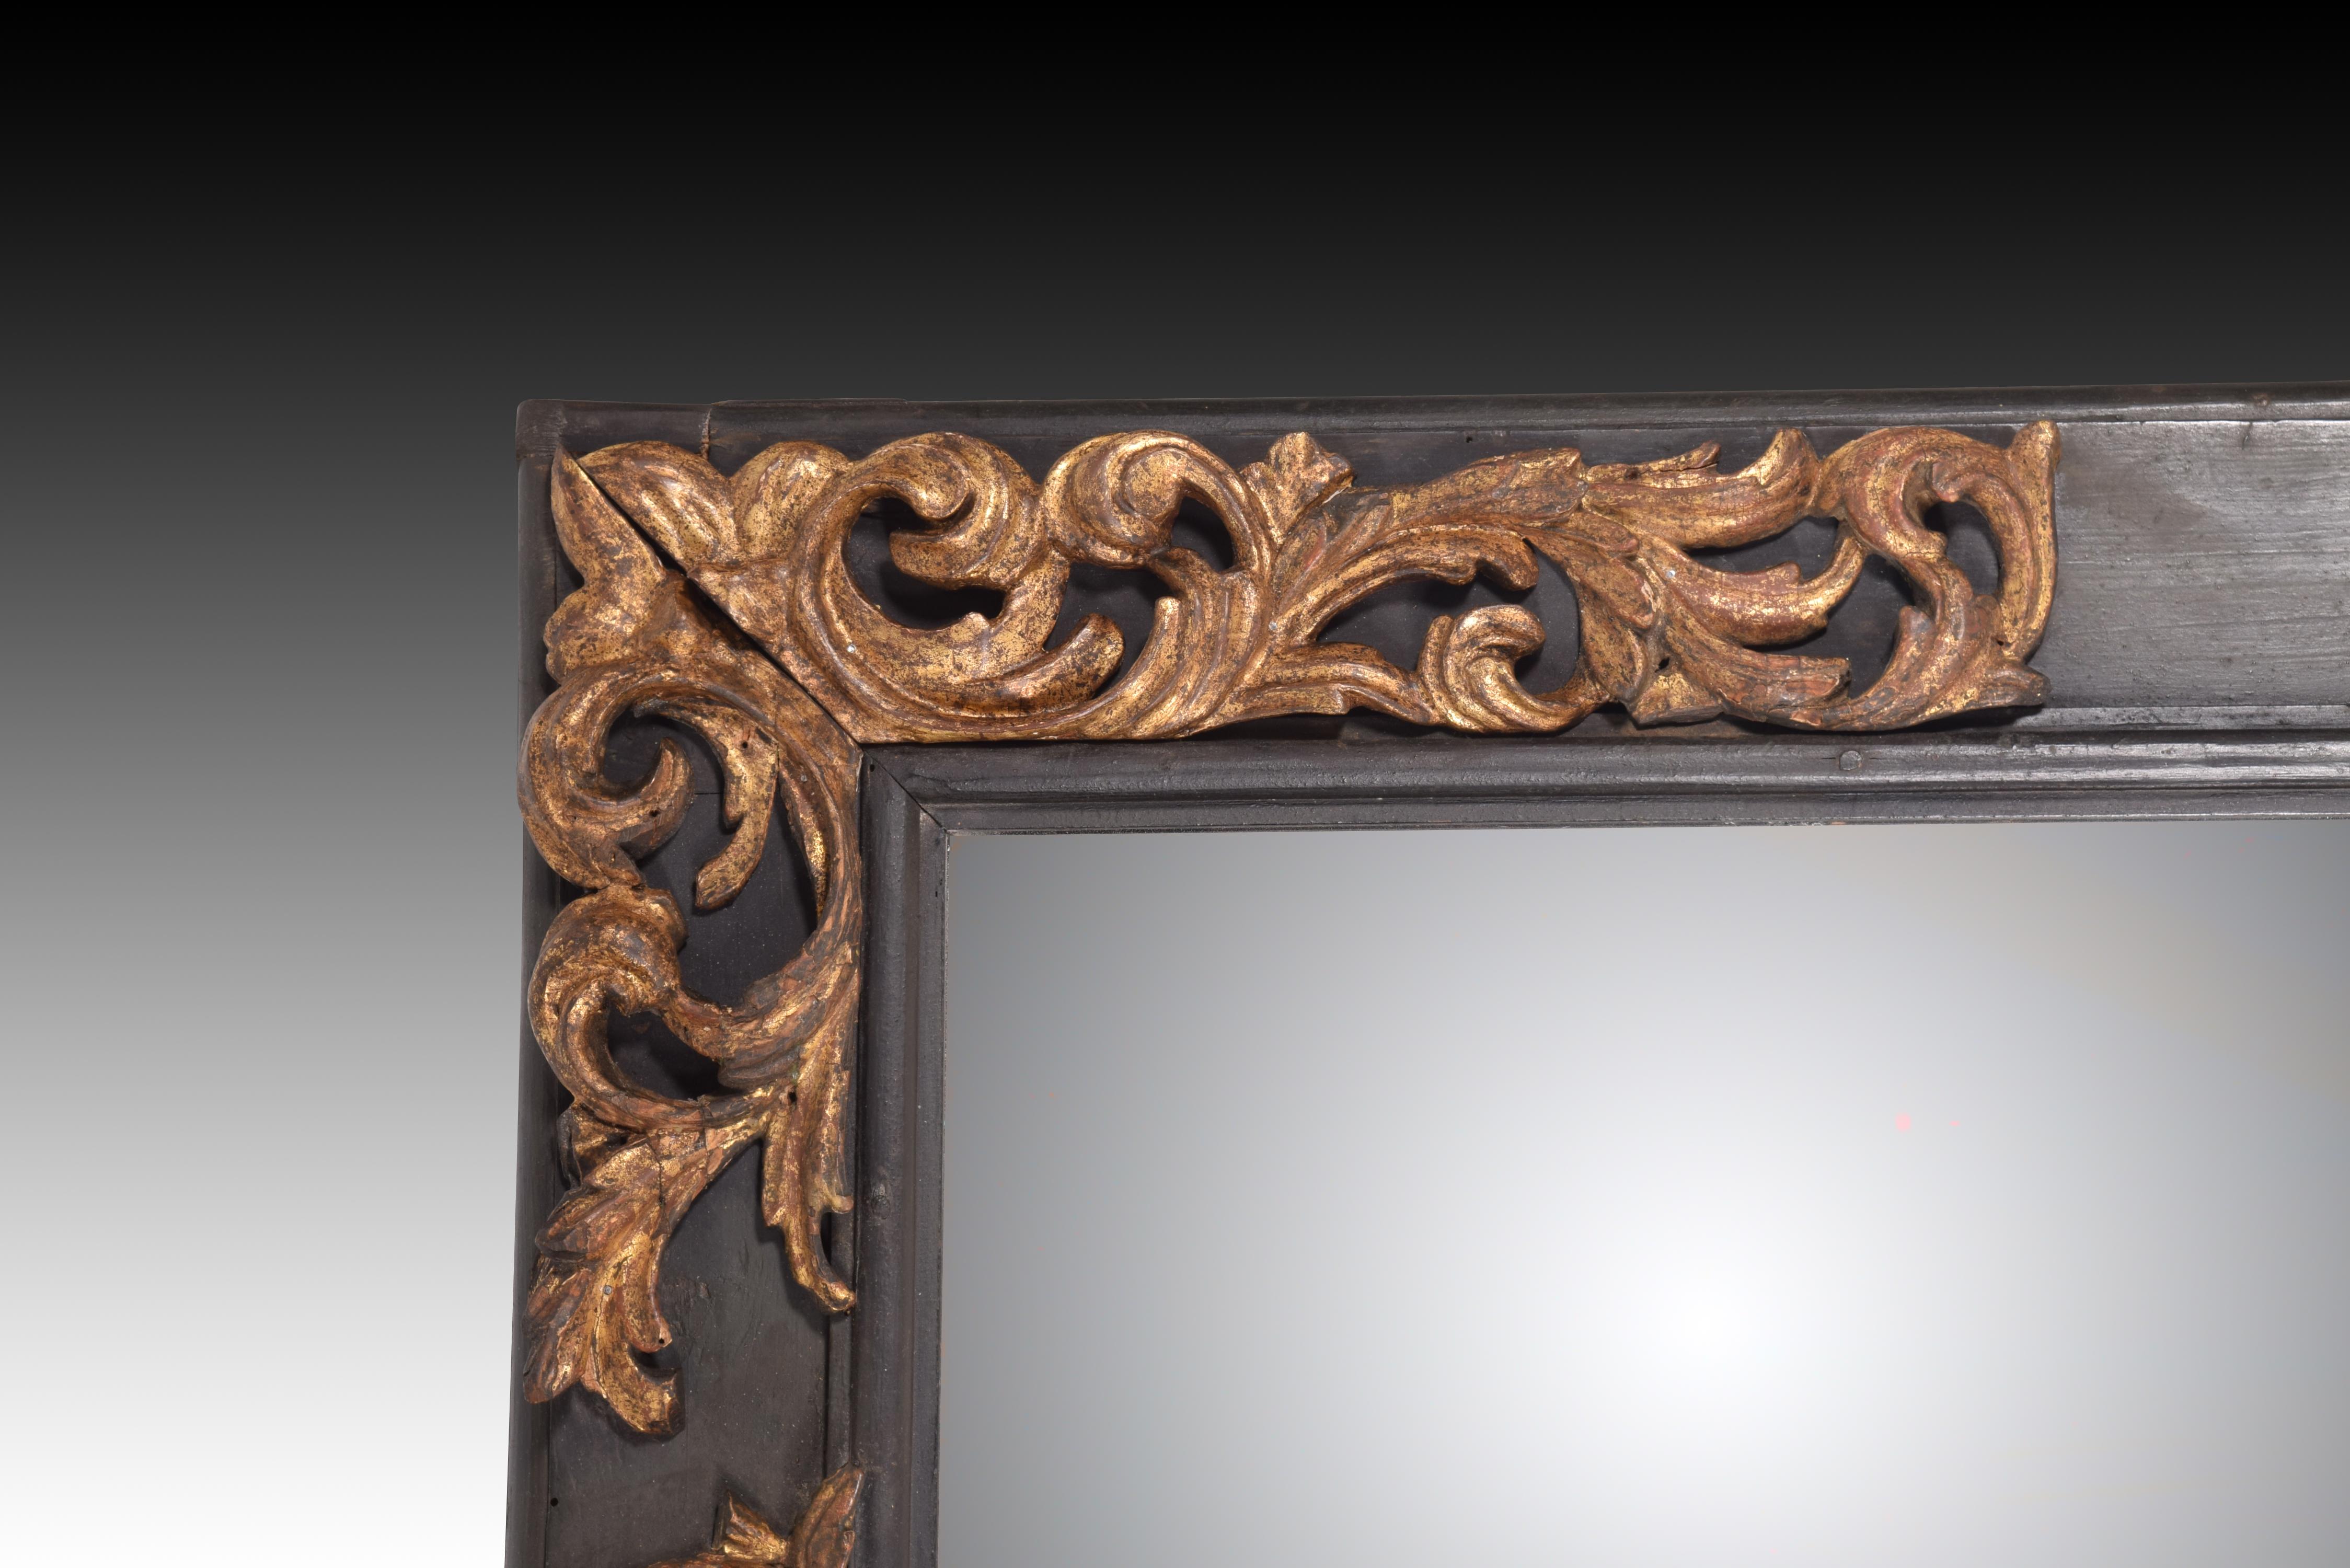 Mirror. Carved wood. XVII century. 
Mirror with a slightly rectangular carved wooden frame that has a metal piece on one of its smaller sides so it can be hung on the wall. The frame has been decorated with a composition based on somewhat fleshy